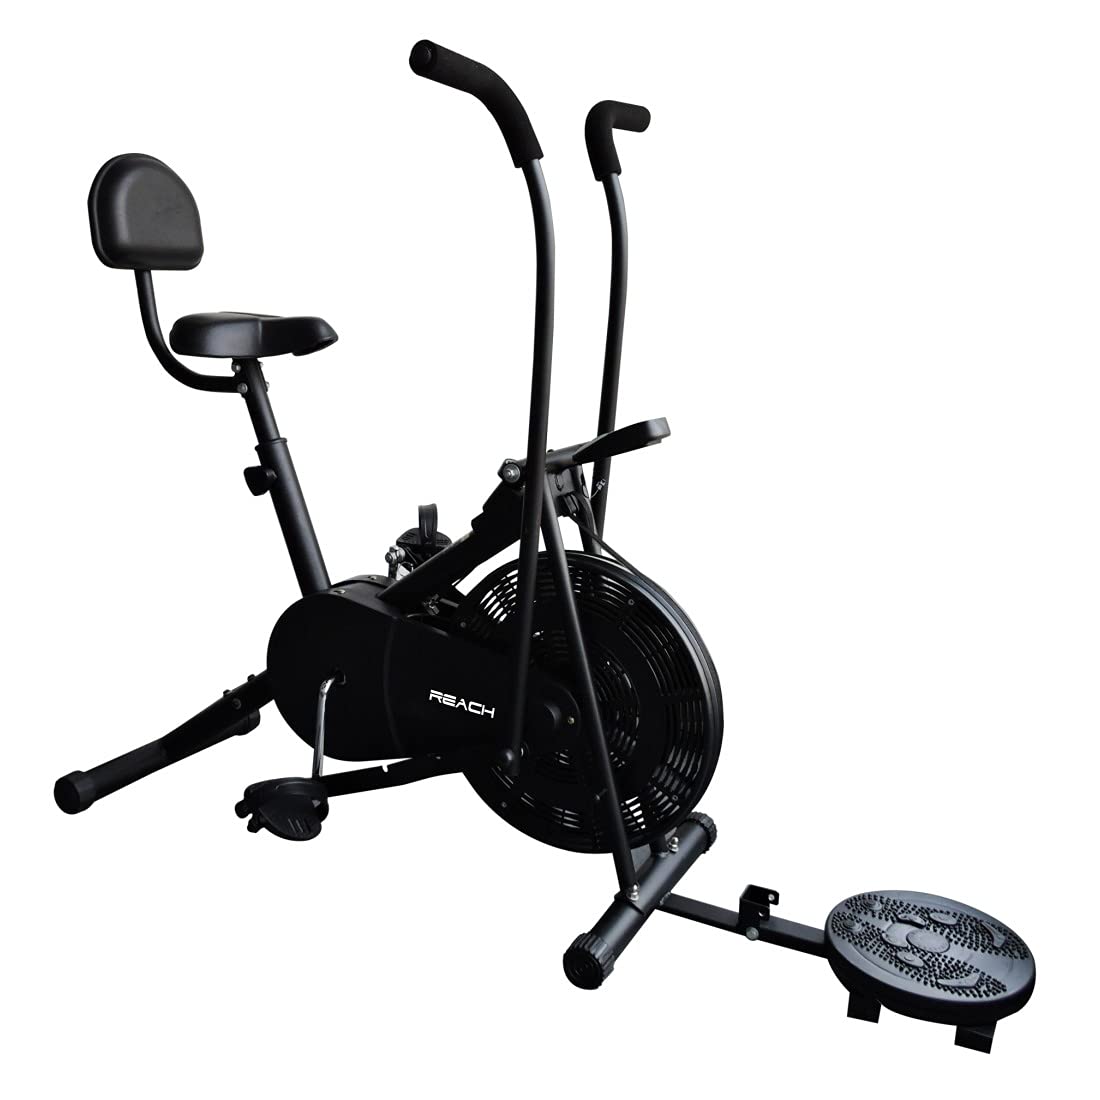     Reach out to the AB-110 BST Exercise Bike